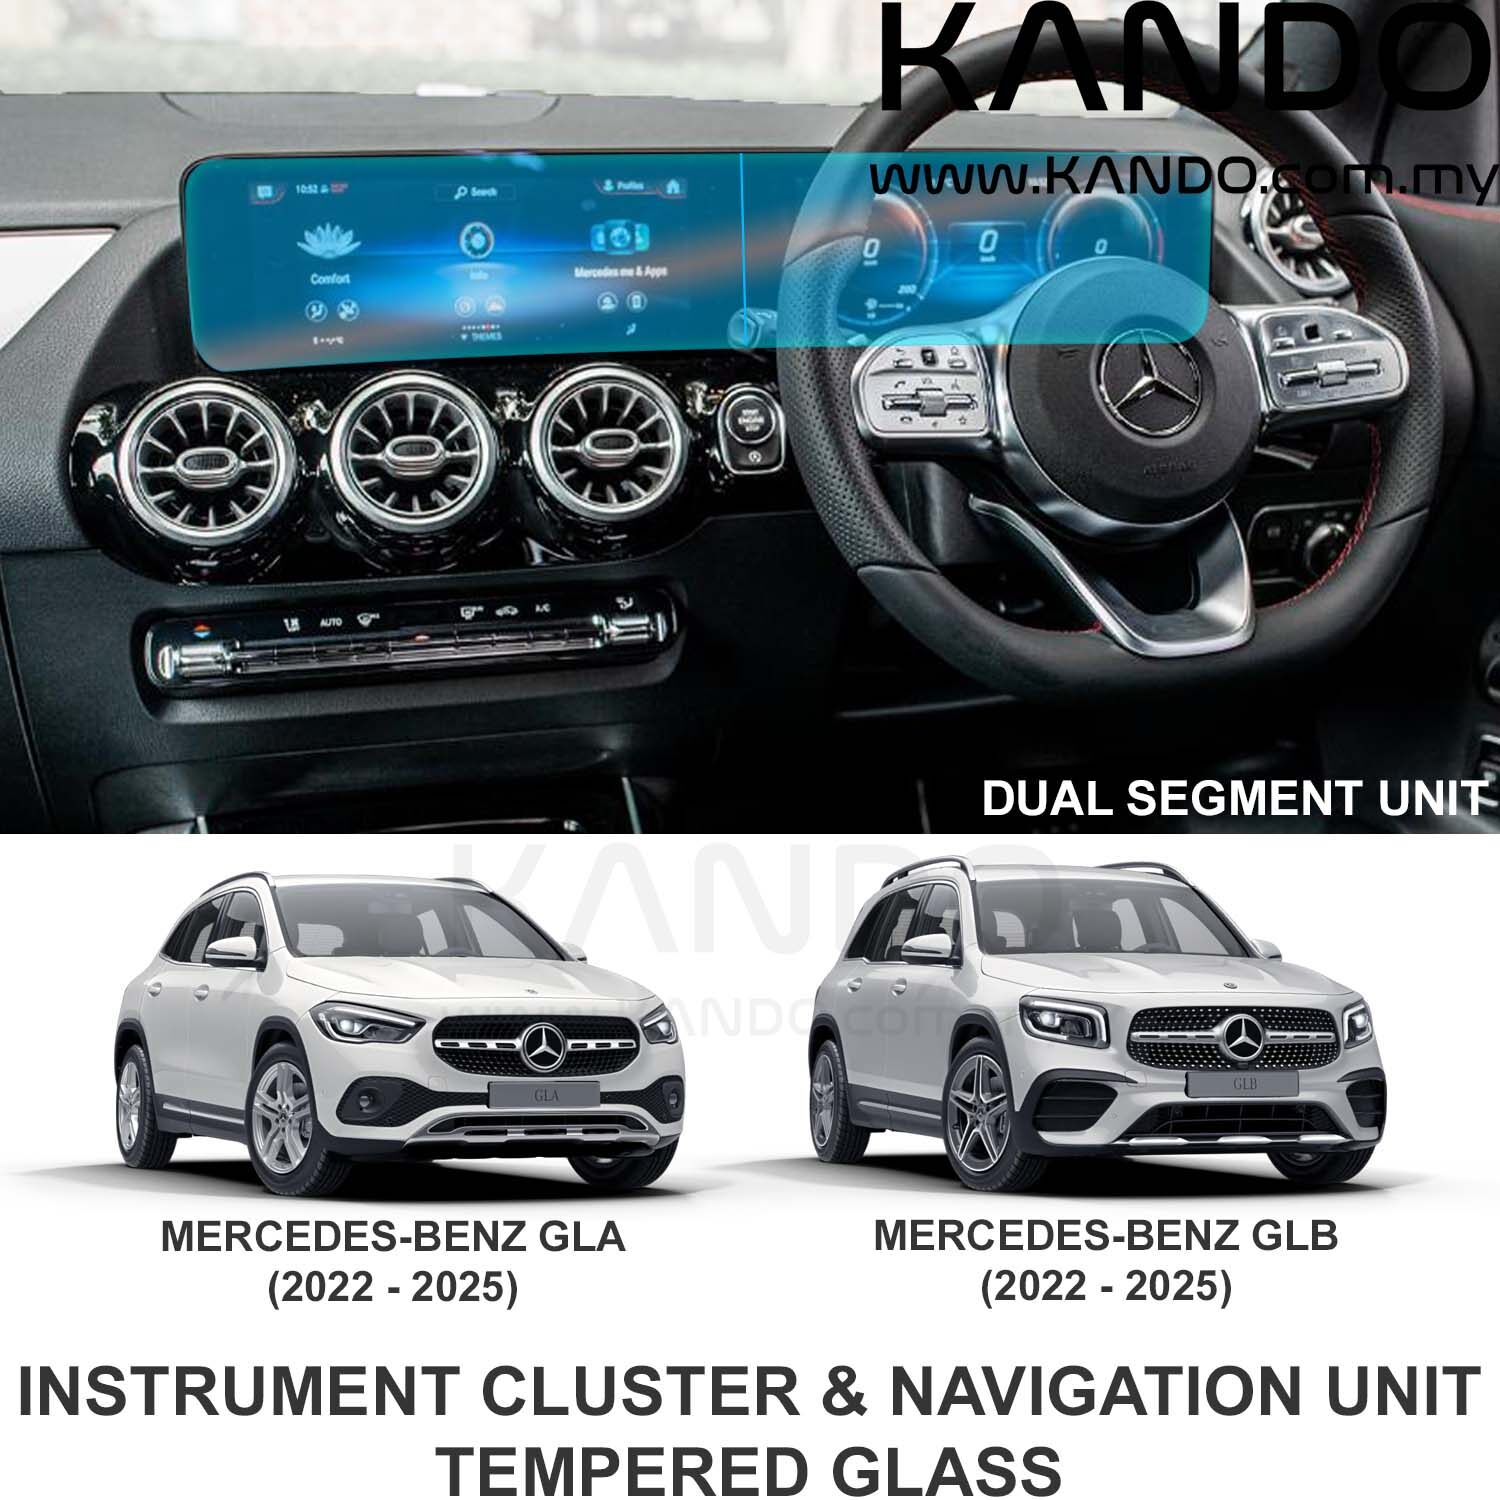 Mercedes Benz GLA Tempered Glass Protector Mercedes GLB Tempered Glass Protector Mercedes GLA Tempered Glass GLA GPS Screen Mercedes GLB Tempered Glass Mercedes GLA Tempered Glass Benz GLB Tempered Glass Benz GLA Tempered Glass Mercedes GLB Tempered Glass